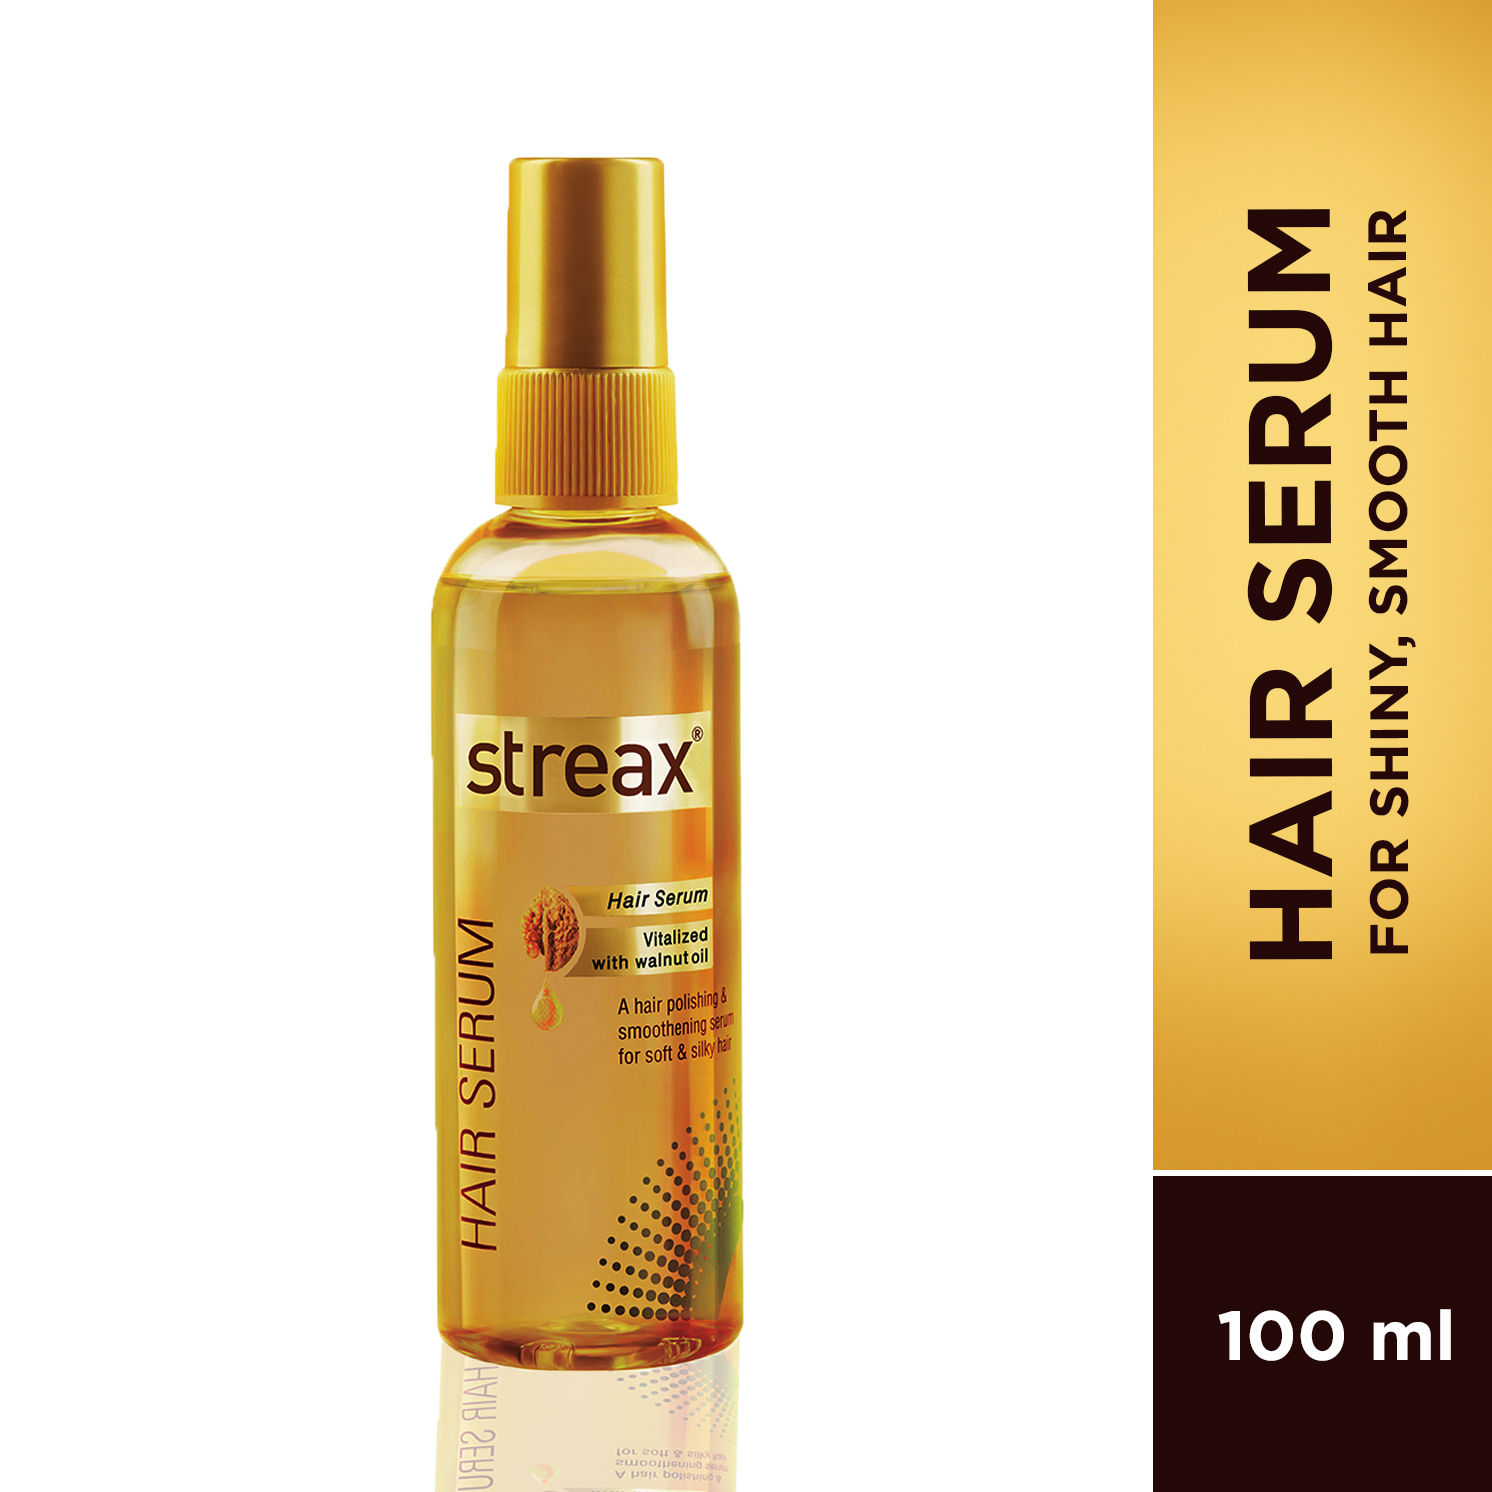 Streax Hair Serum Review /Tips To Apply Hair Serum For Frizzy Hair/Parna's  Beauty World - YouTube